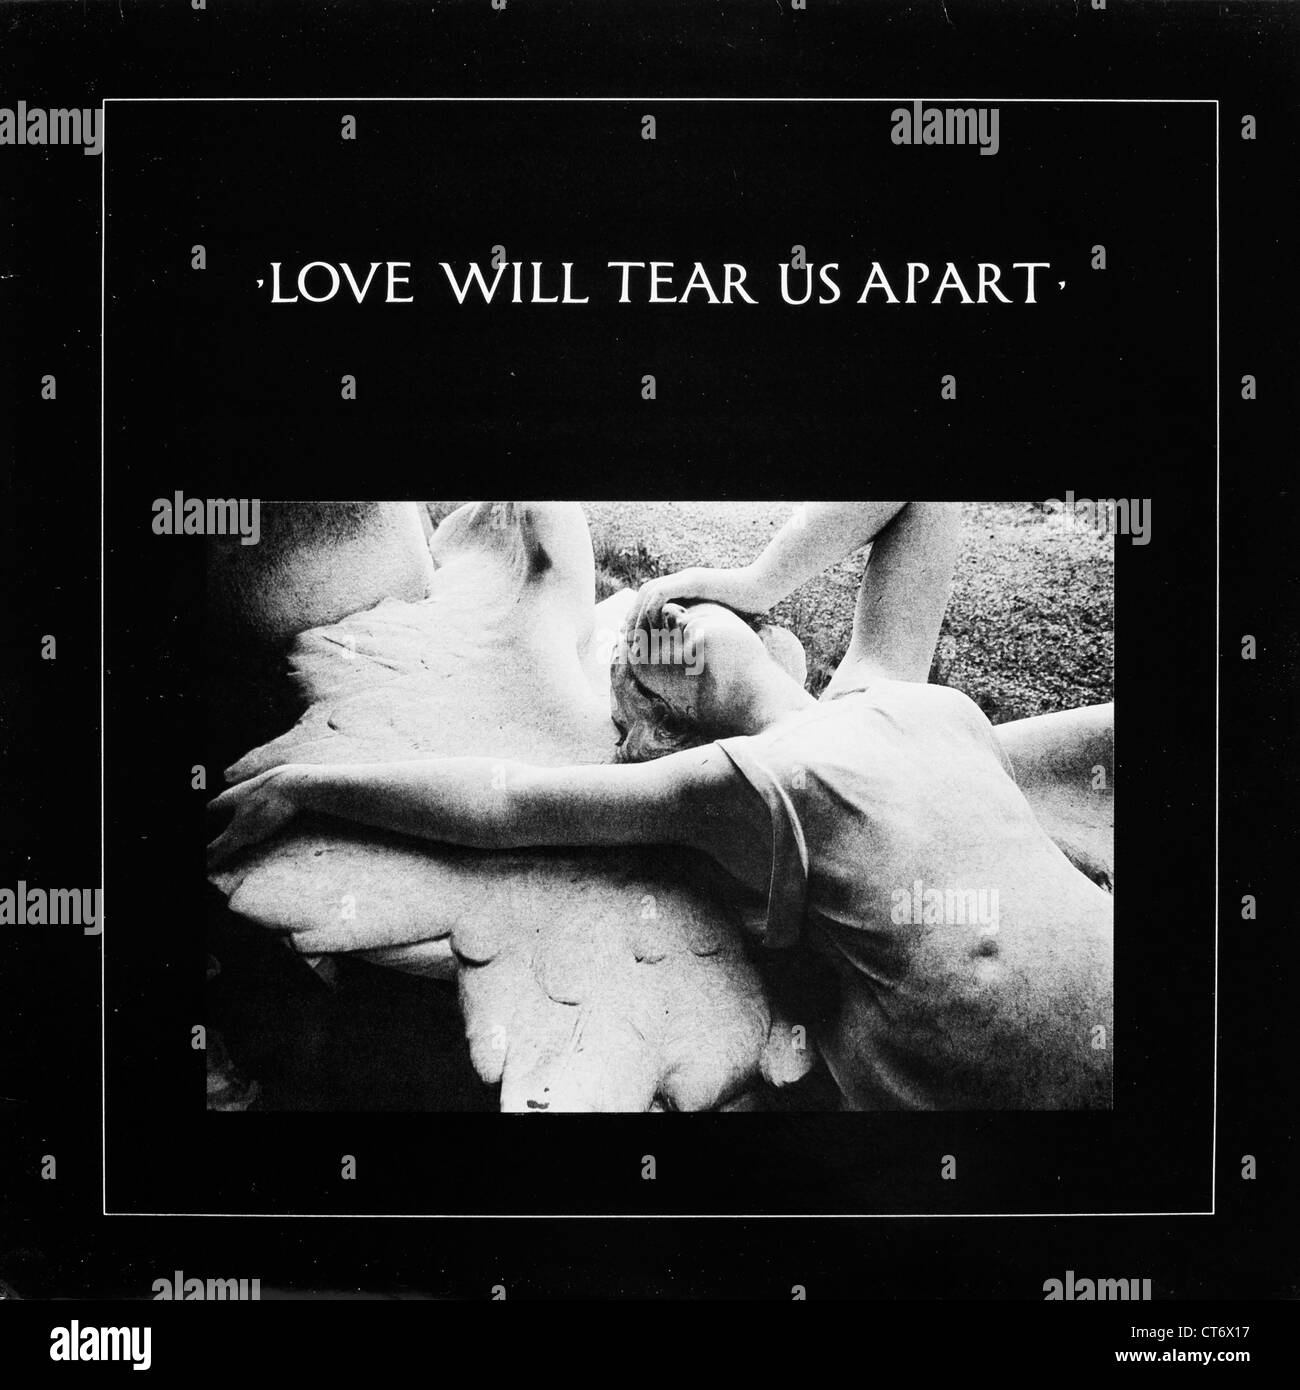 Record album cover of Joy Division, Love Will Tear Us Apart.  Editorial use only.  Commercial use prohibited. Stock Photo